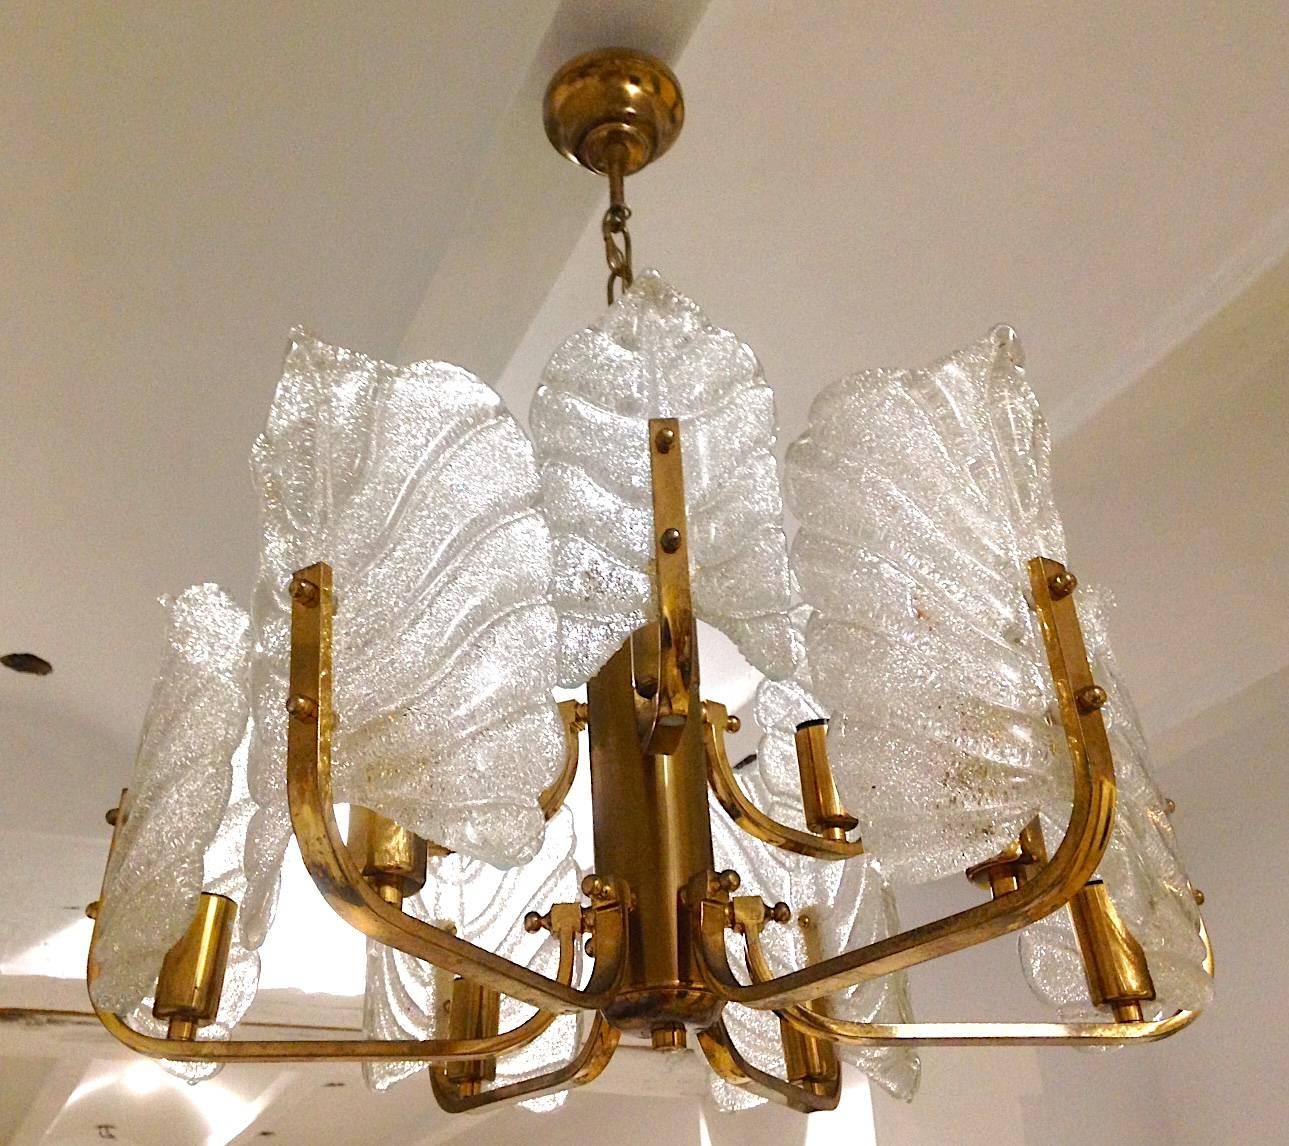 A wonderful, elegant glass chandelier by Carl Fagerlund for Orrefors, Sweden, circa 1960s. It is composed of nine textured Barovier & Toso Murano glass leaves and a six-light brass frame.